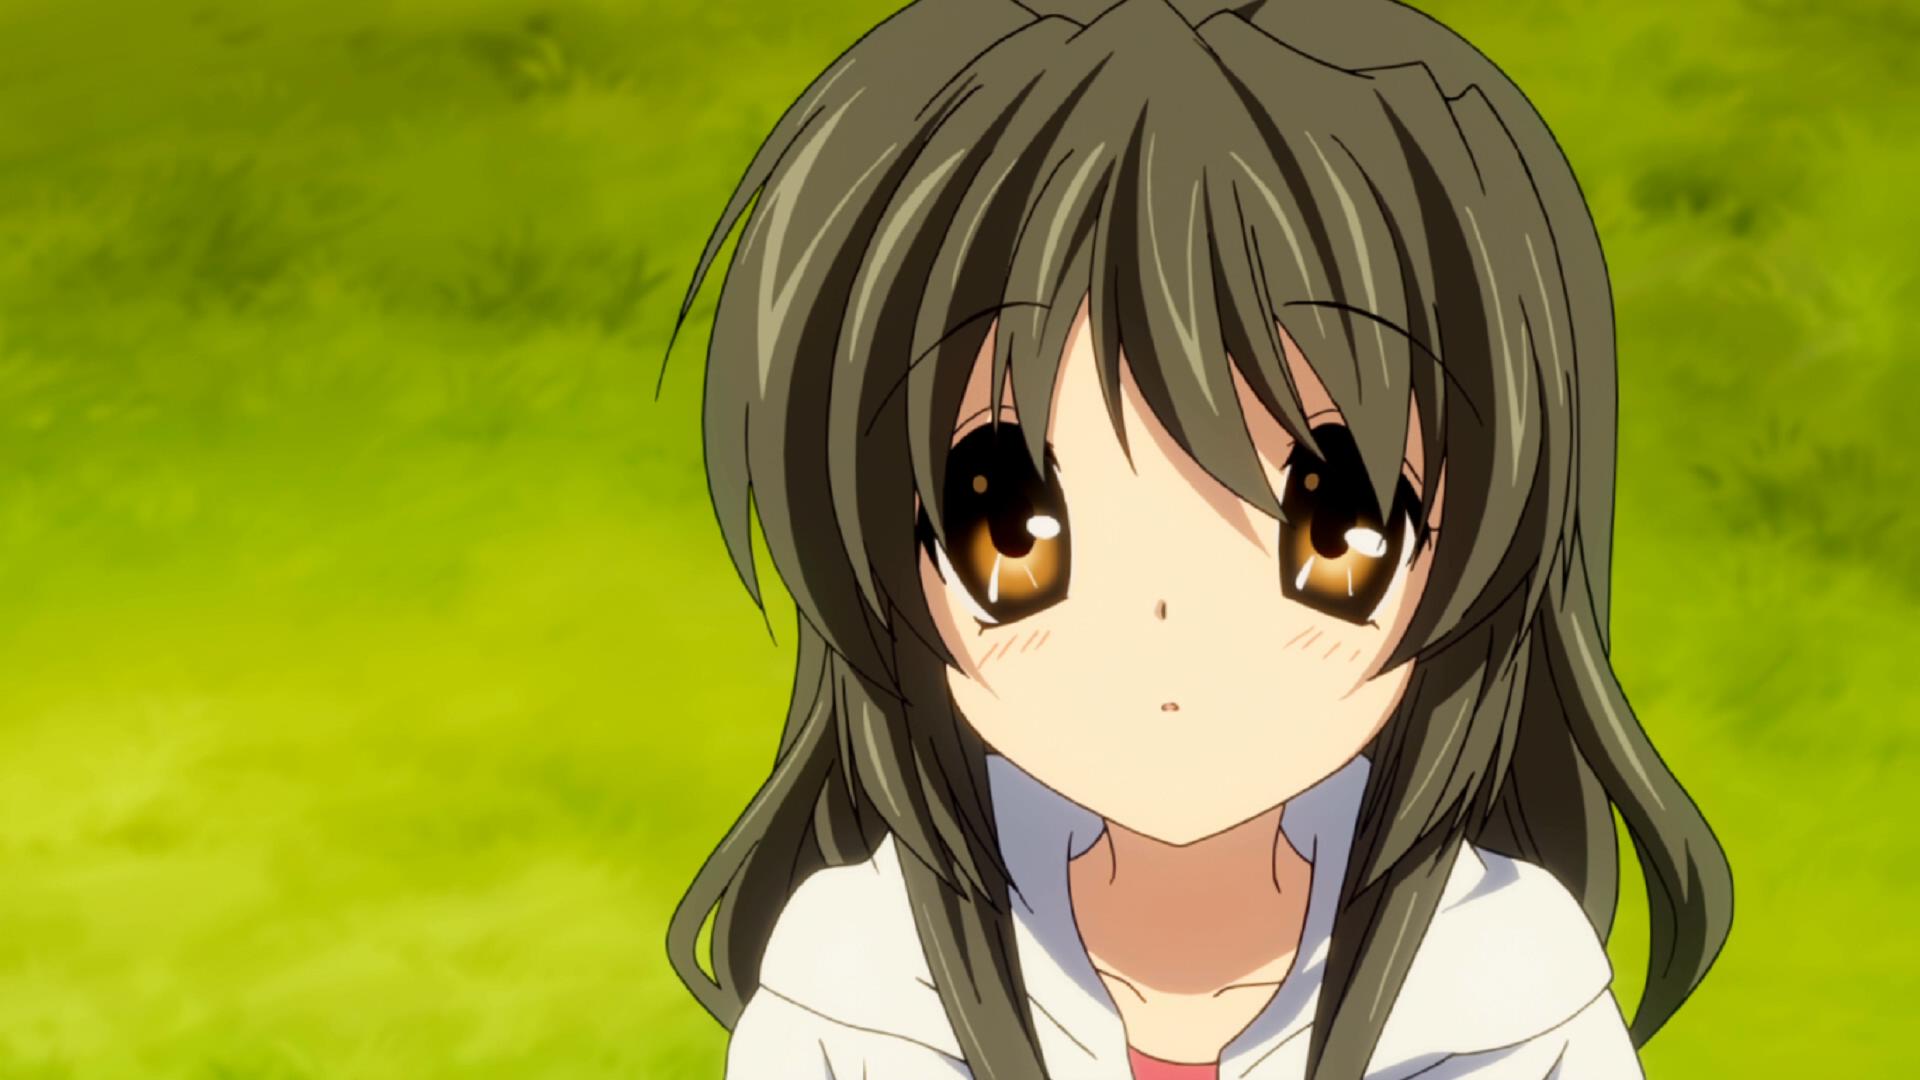 [QTS] CLANNAD ~After Story~ ep 19 (BD H264 1920x1080 24fps FLAC 5.1ch)_20122419237.jpg